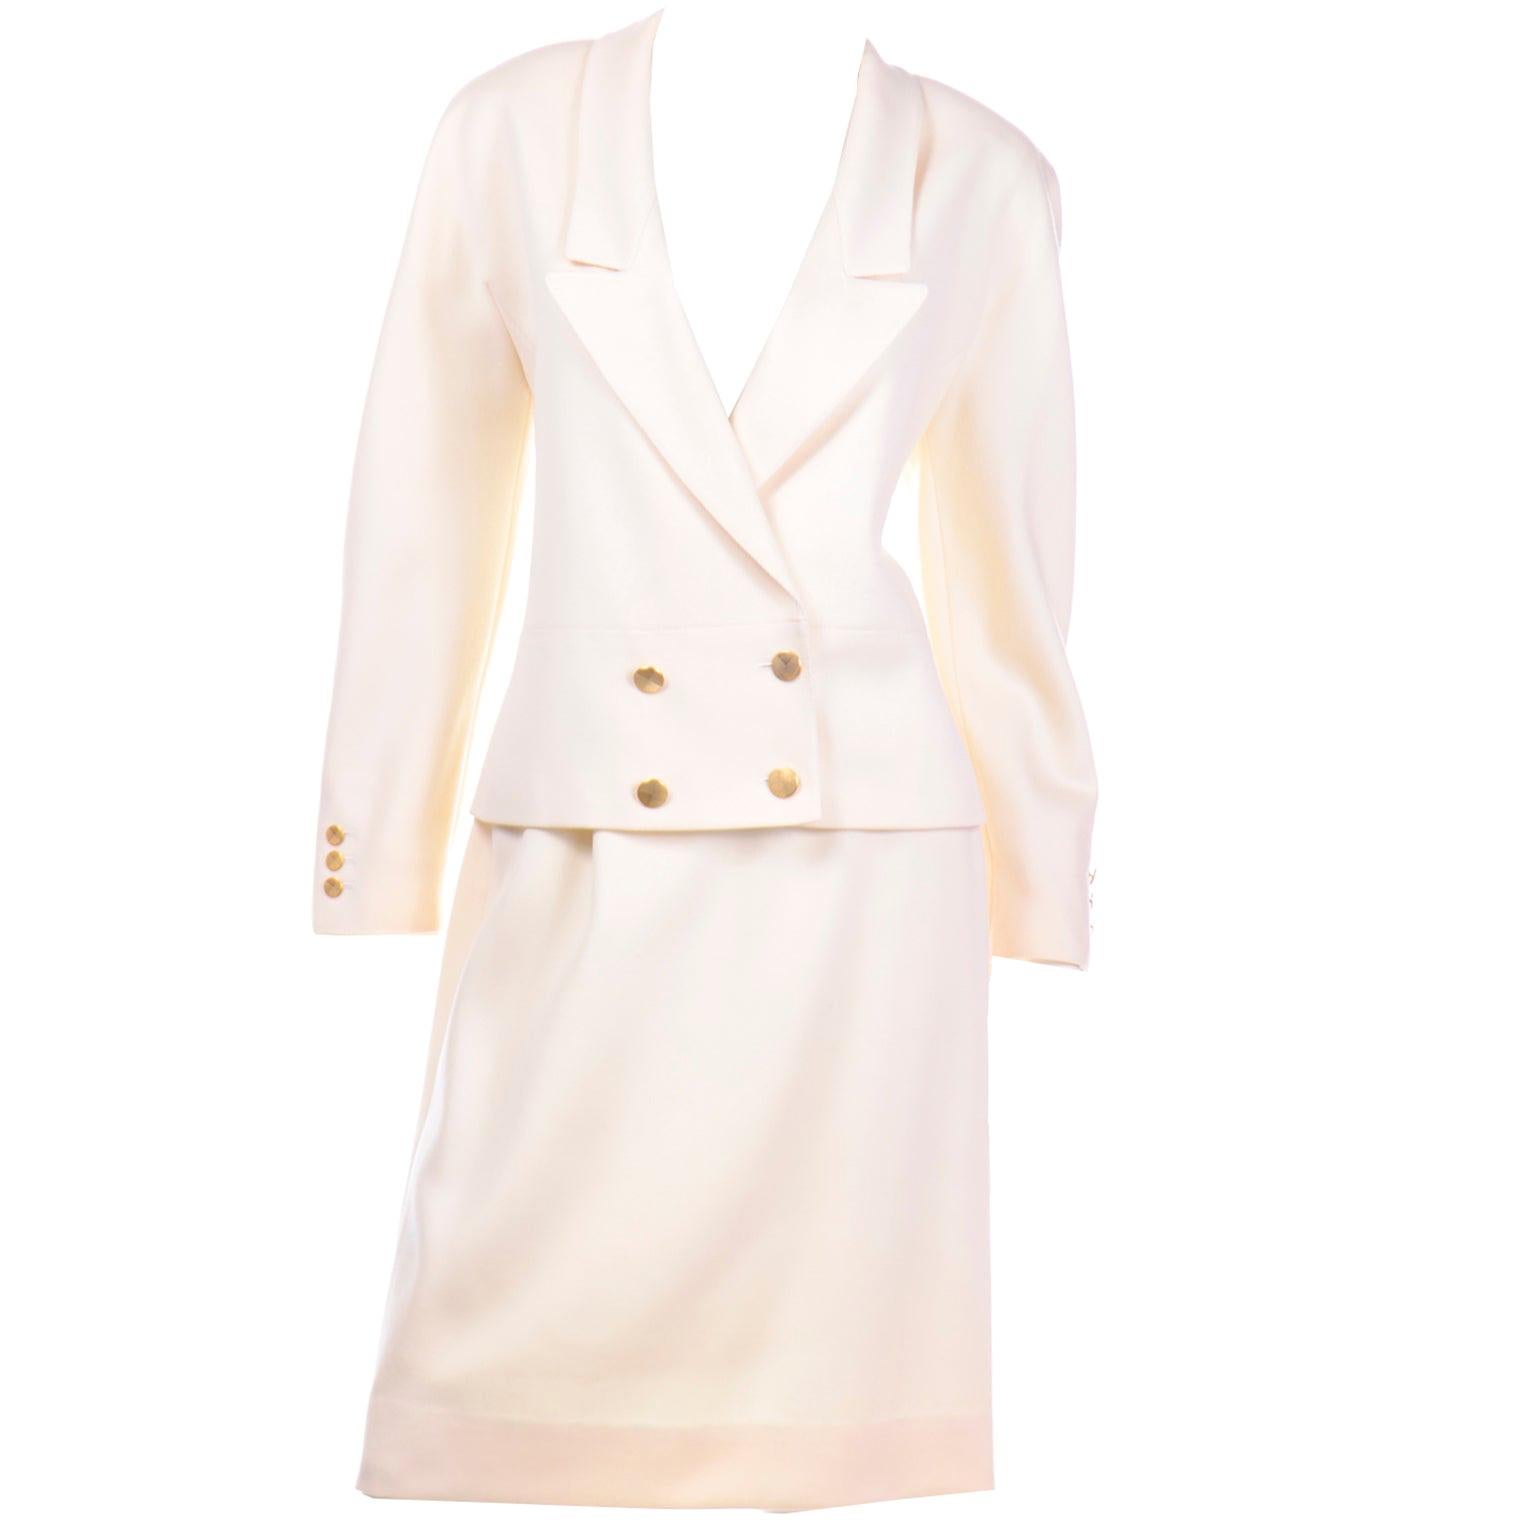 Vintage Louis Feraud Cream Jacket and Skirt Suit 1980s For Sale